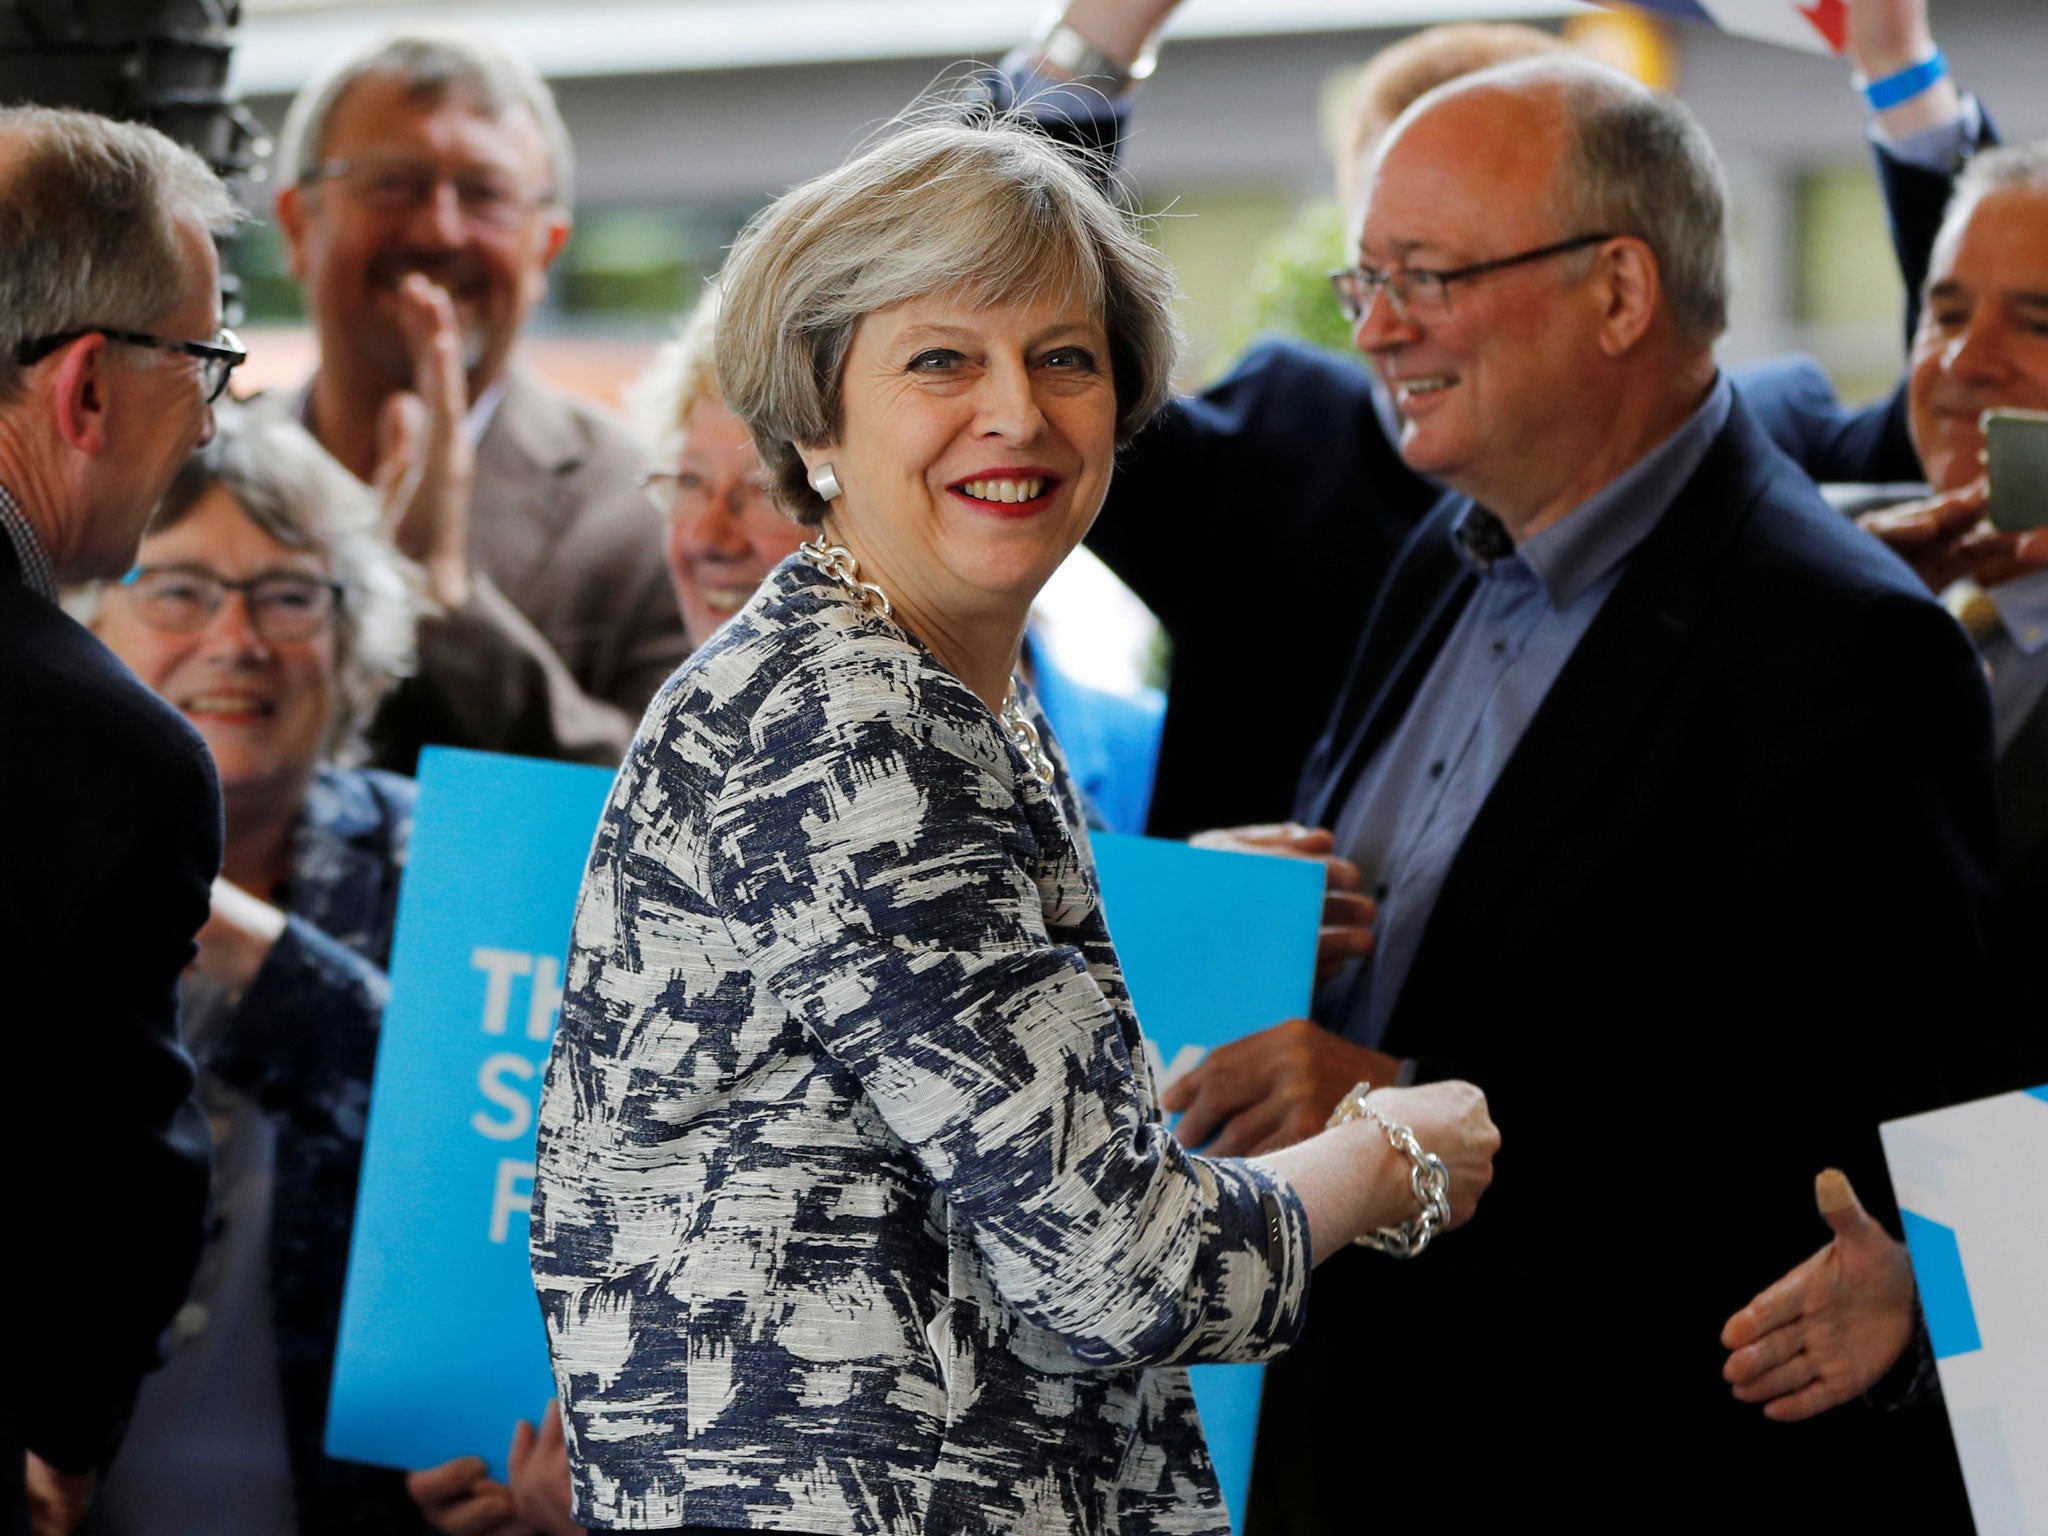 Theresa May arrives with her husband Philip at an election campaign event in Solihull